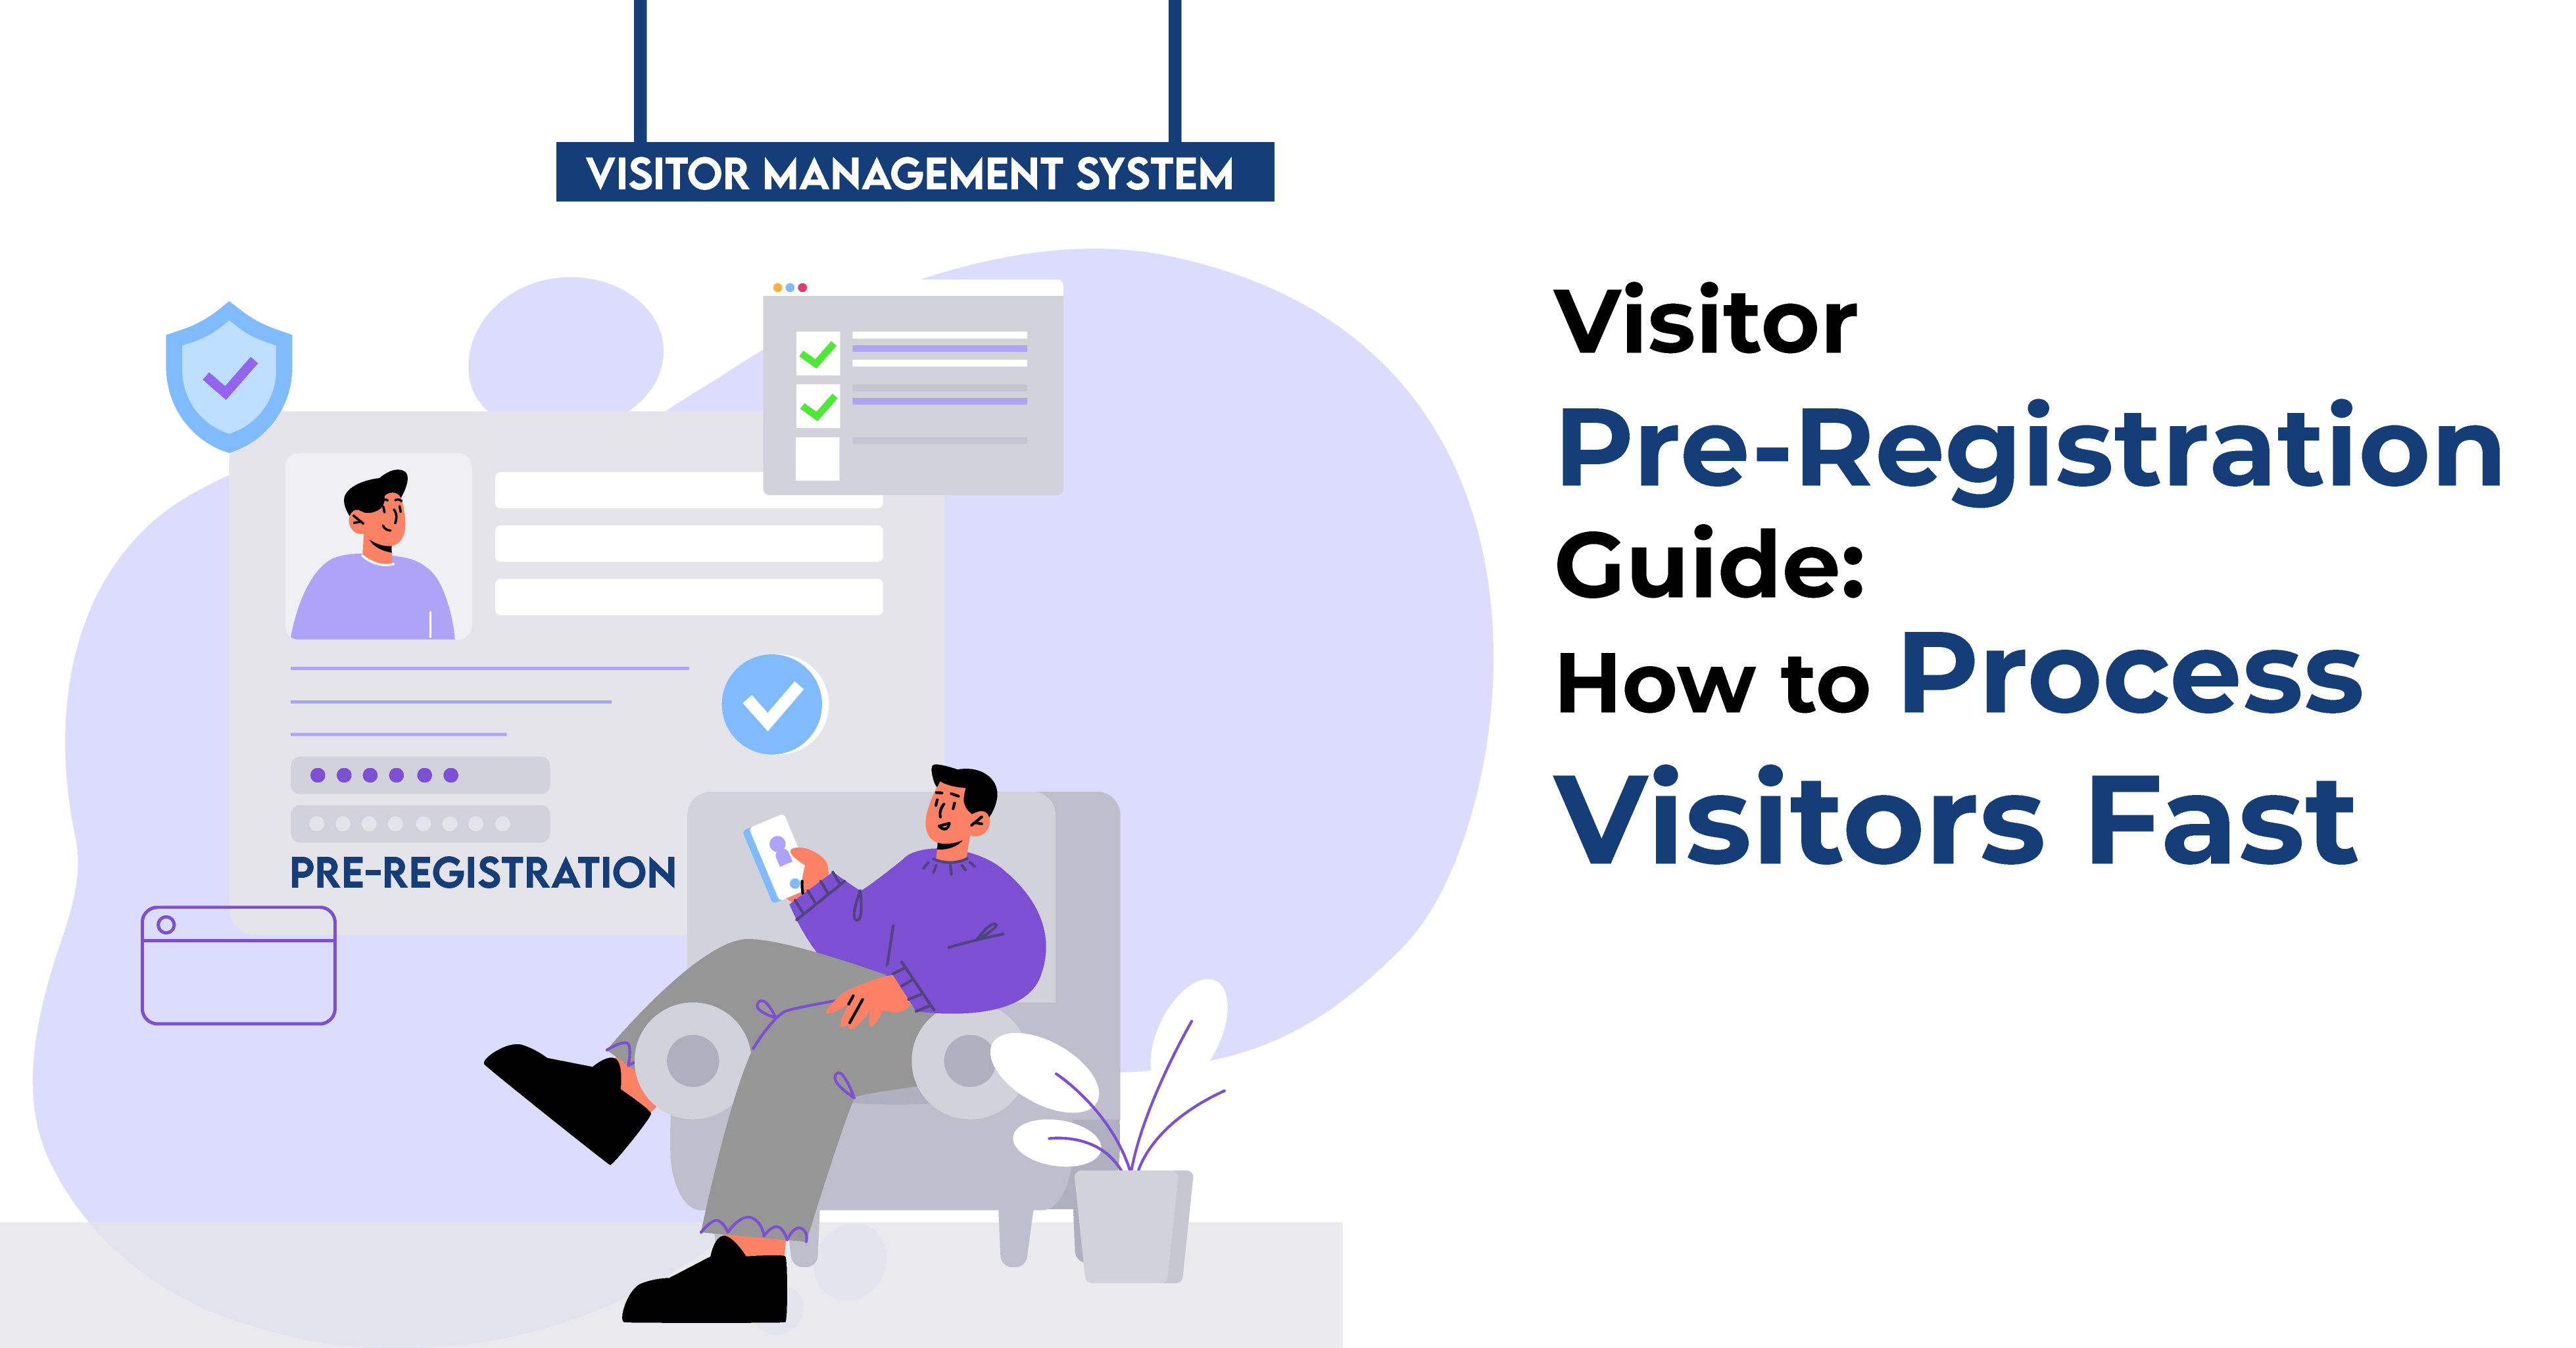 Visitor Pre-Registration Guide: How to Process Visitors Fast